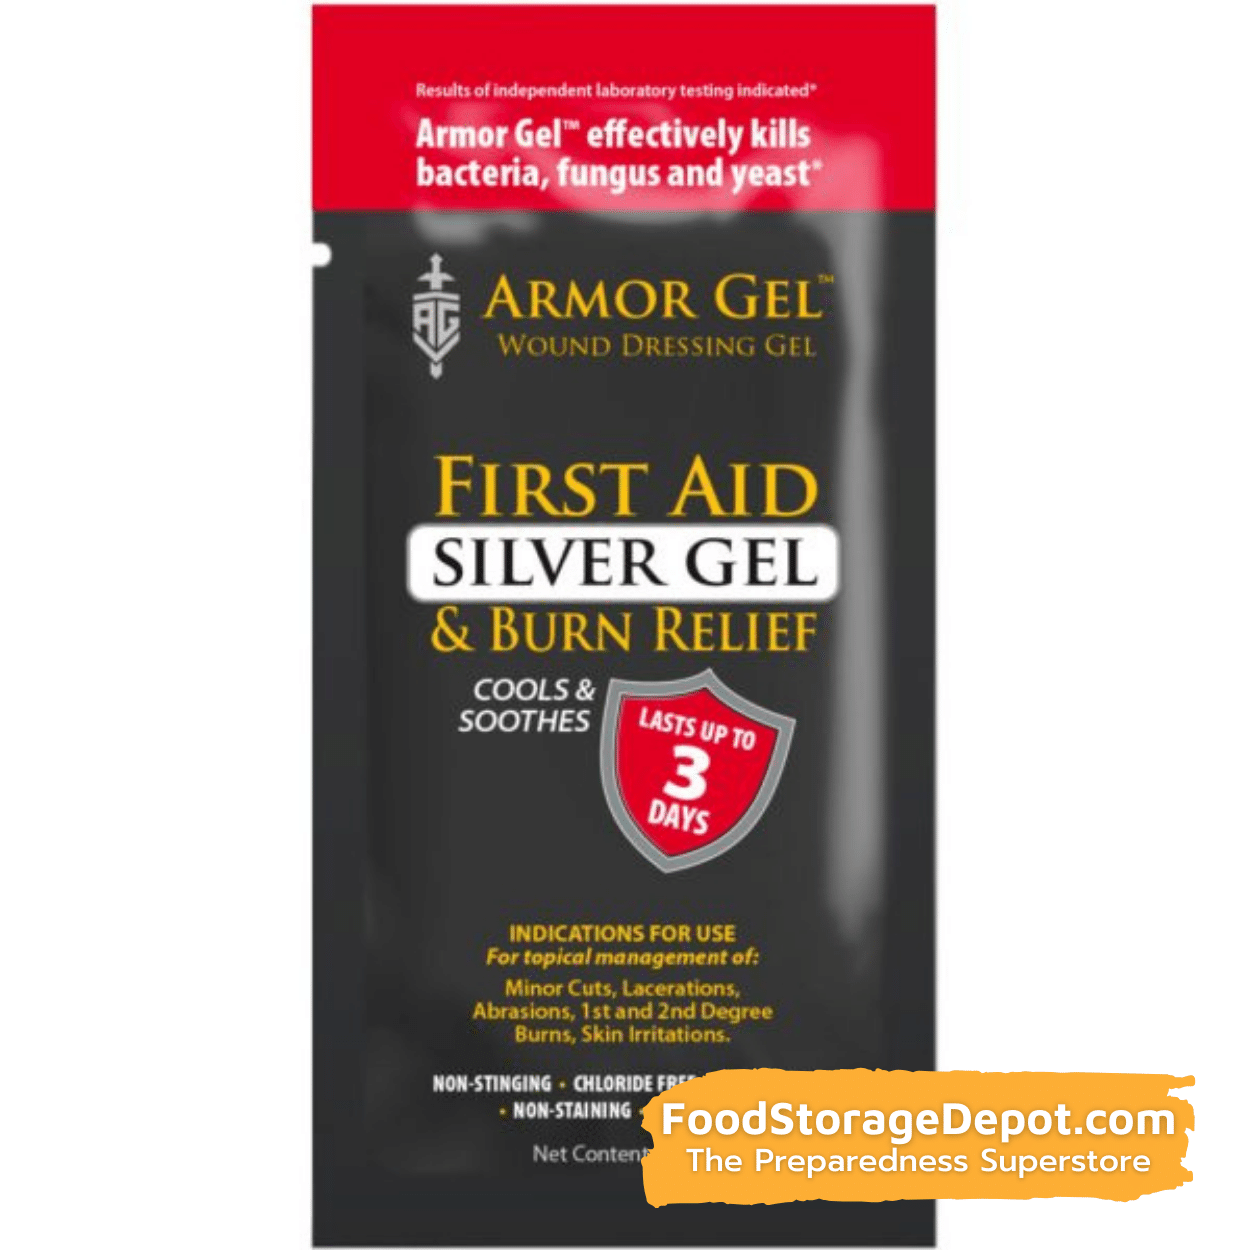 Armor Gel First-Aid Anti-Bacterial Wound Dressing